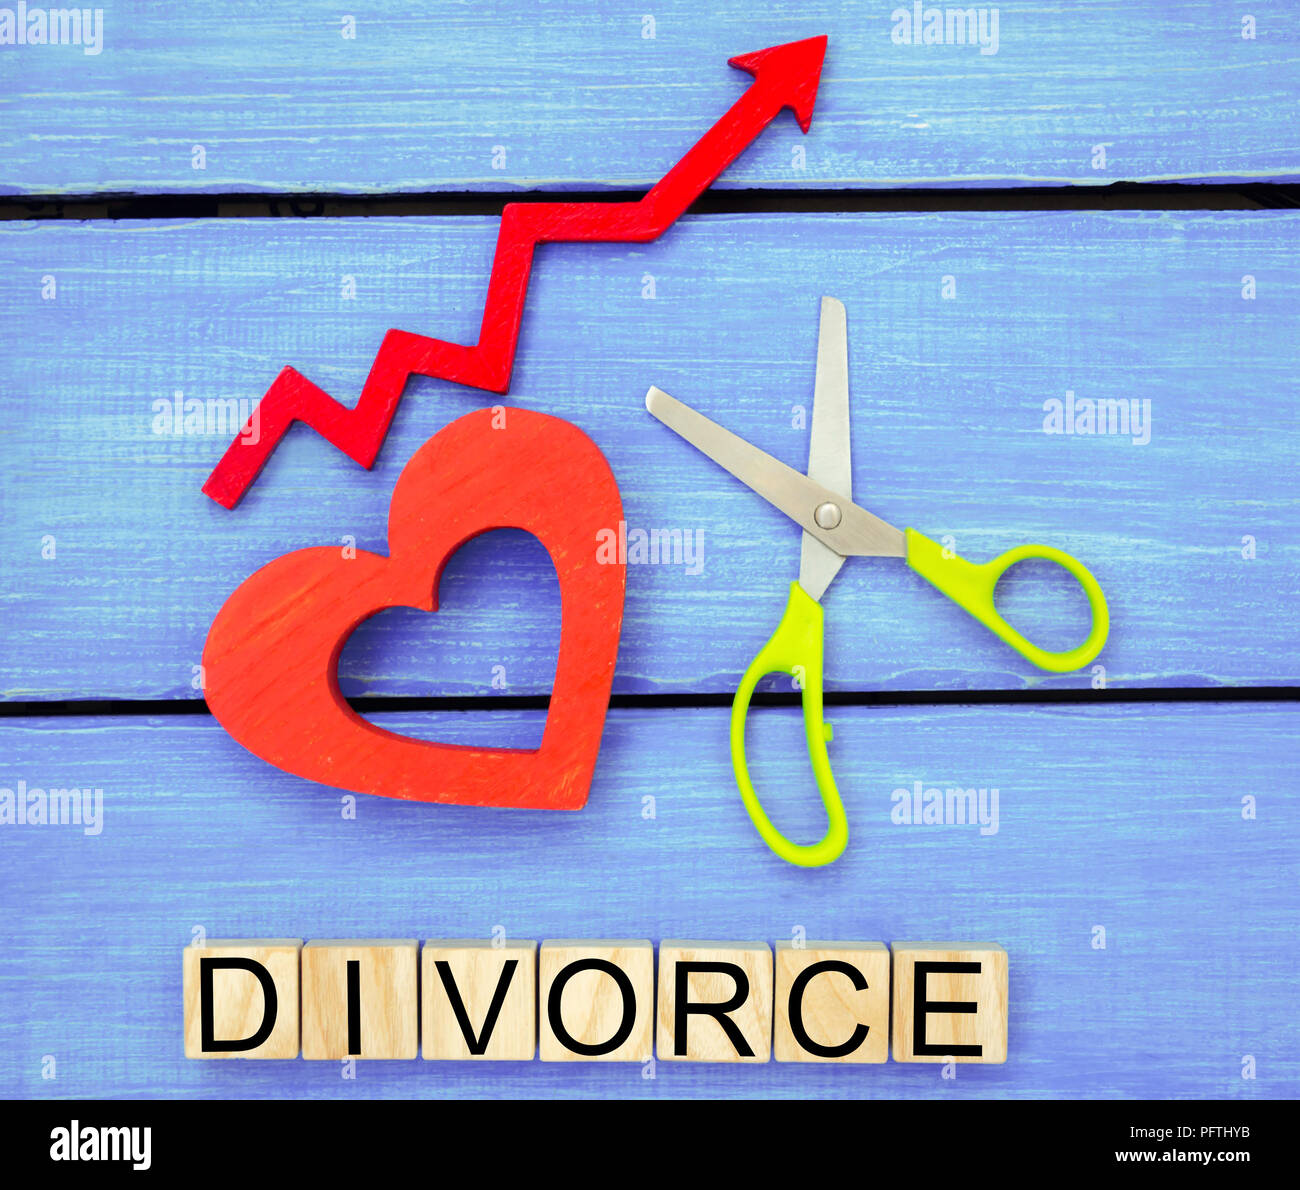 increased divorce rates. problems of the modern age. the inscription 'divorce' and the red up arrow. scissors cut heart. breaking relations, quarrels. Stock Photo